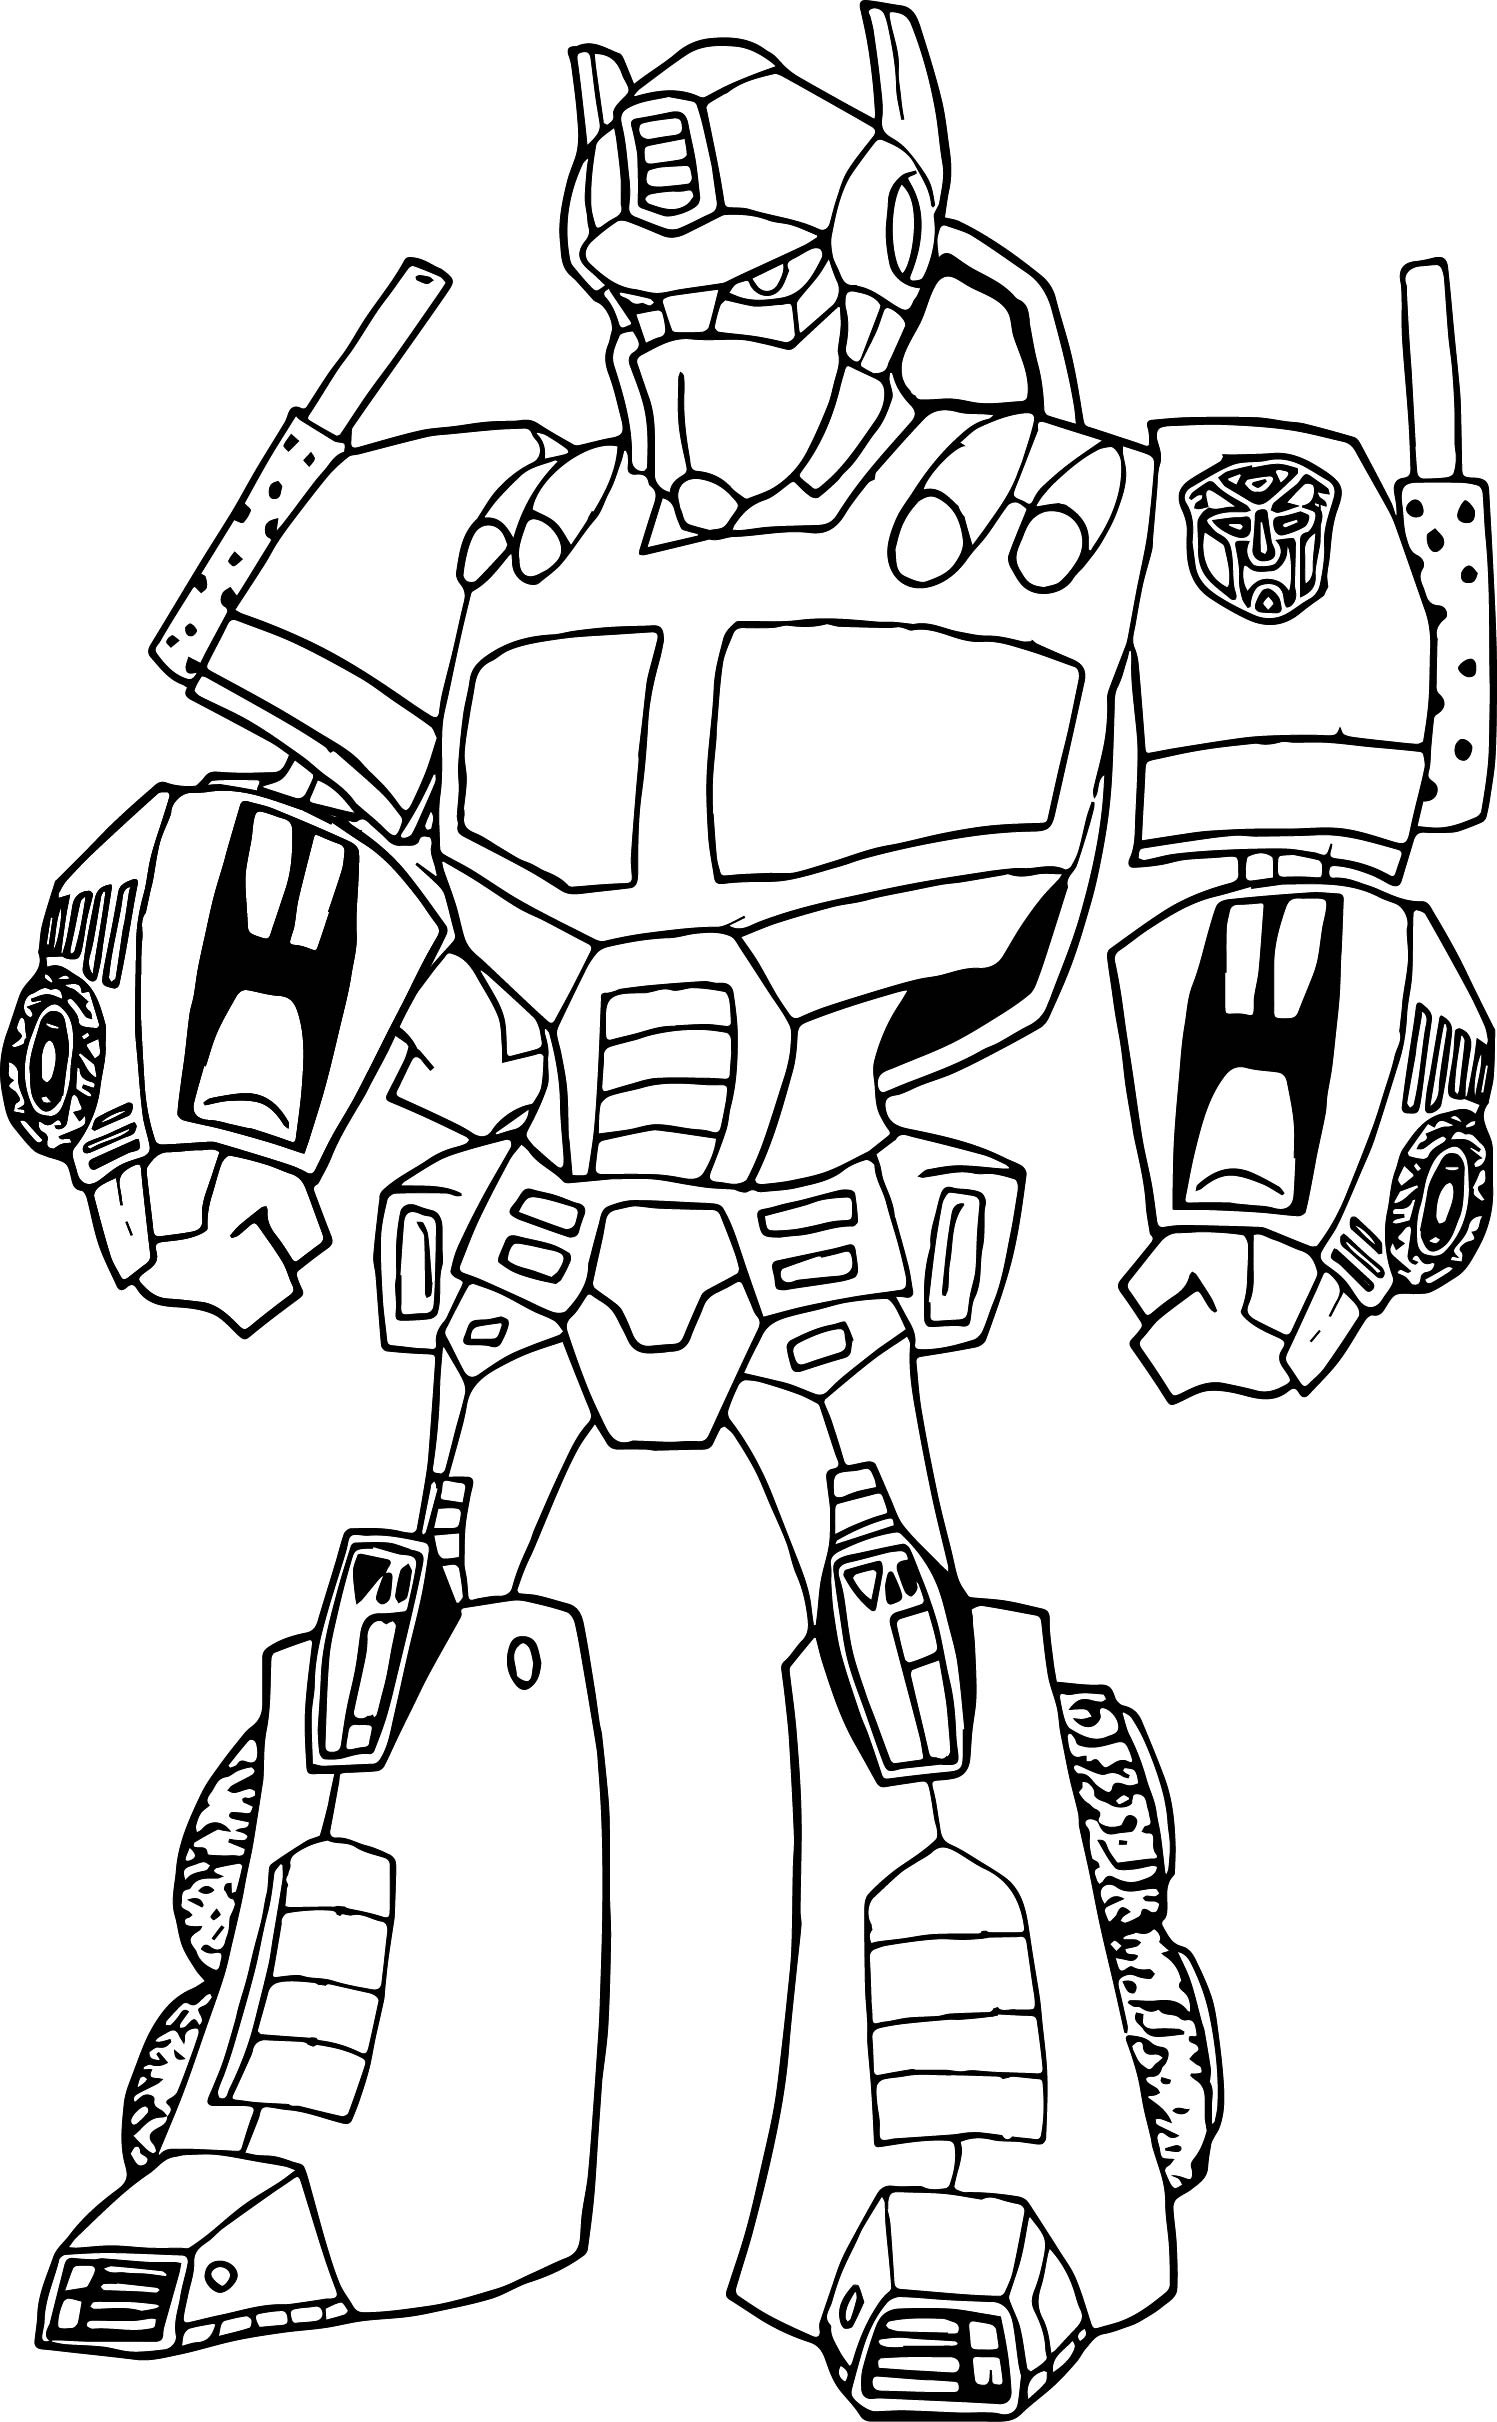 the best free steel coloring page images download from